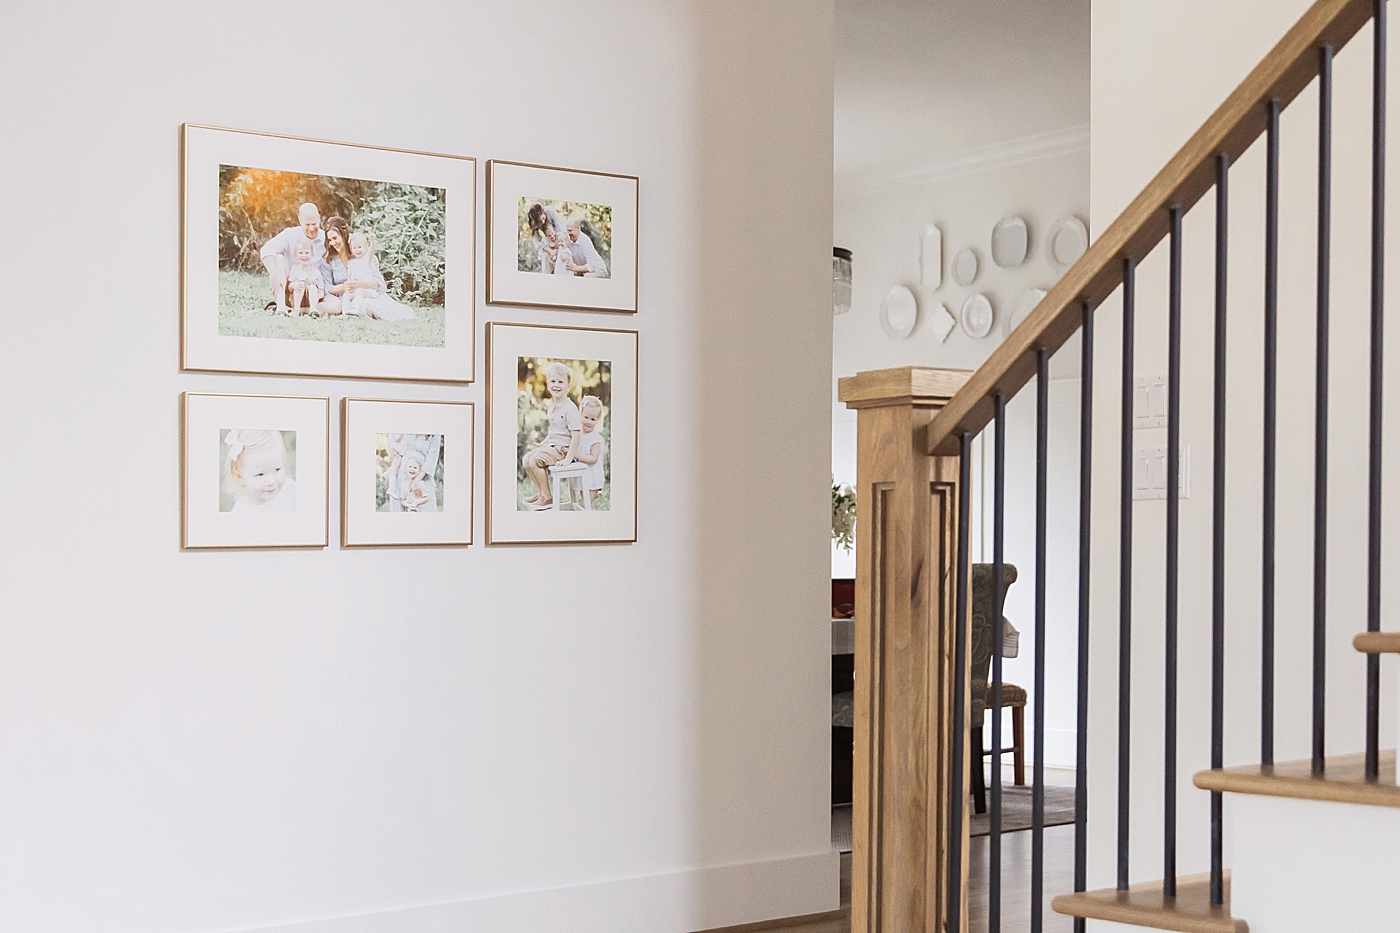 Gallery wall design ideas for displaying artwork in your home. Photo and design by Fresh Light Photography.